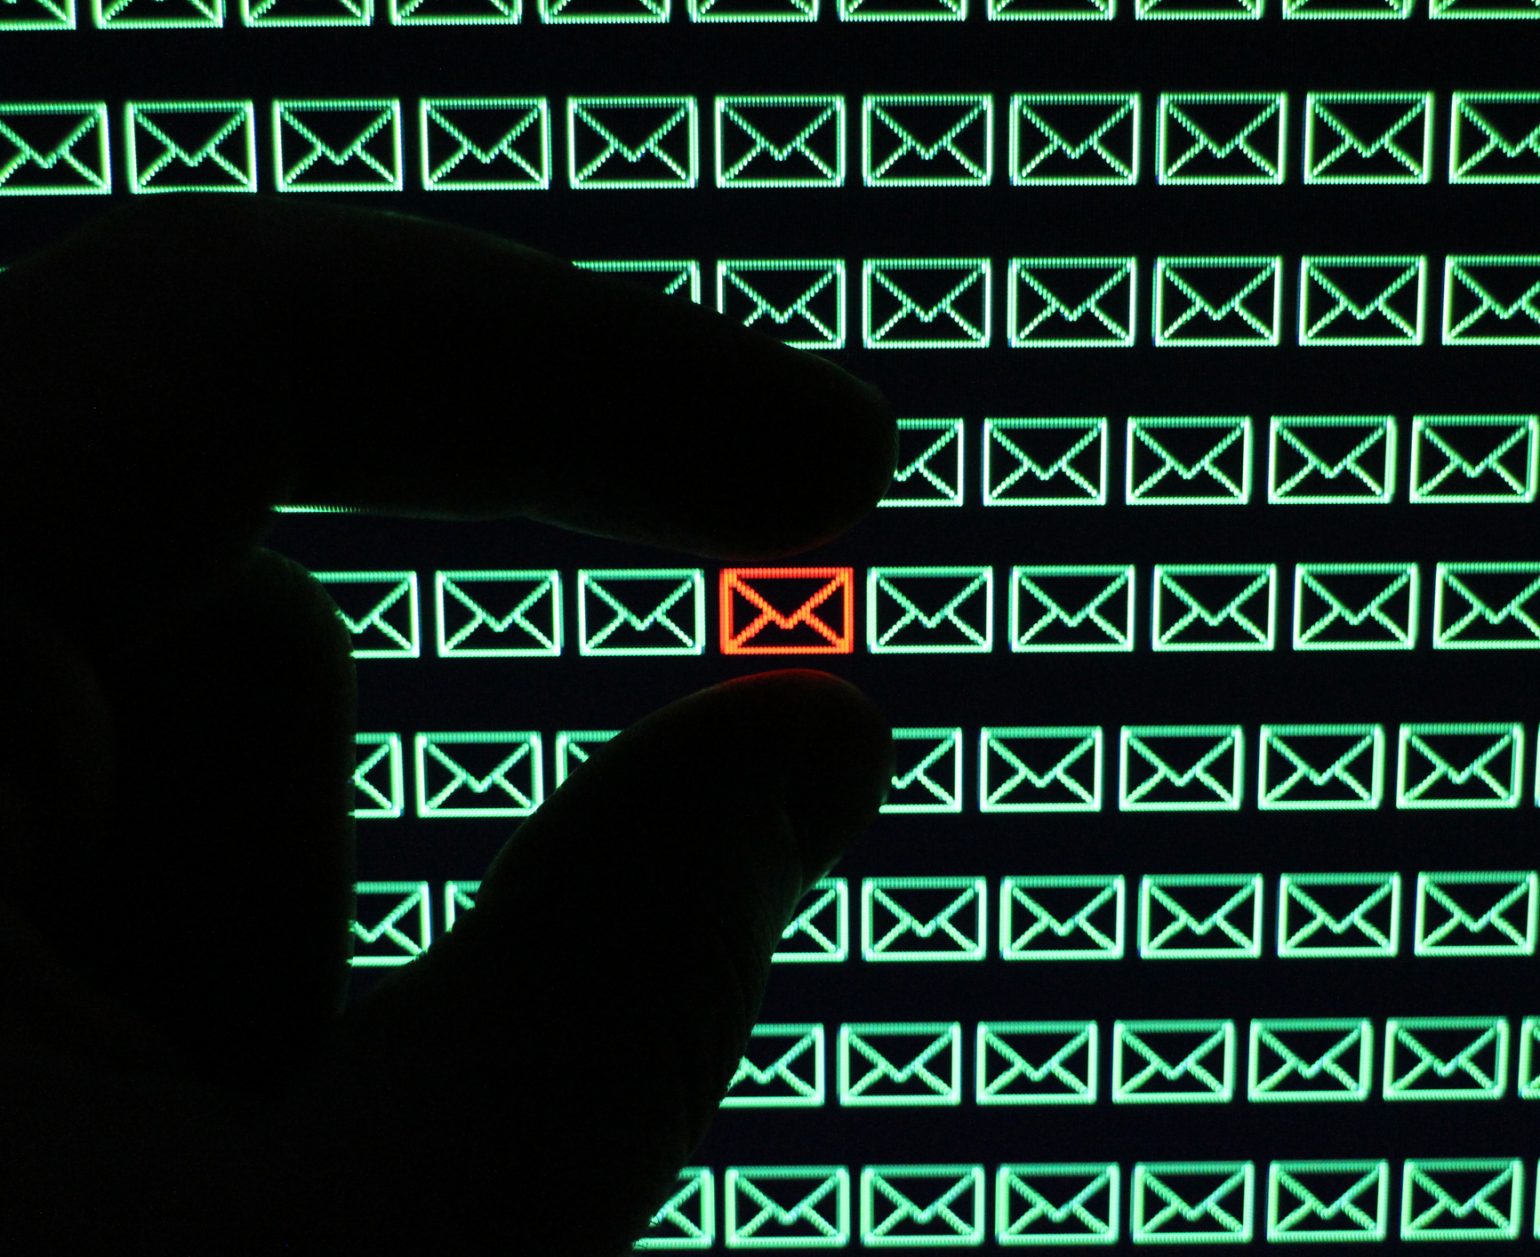 Shadow hand selecting red email icon from a field of green email icons.